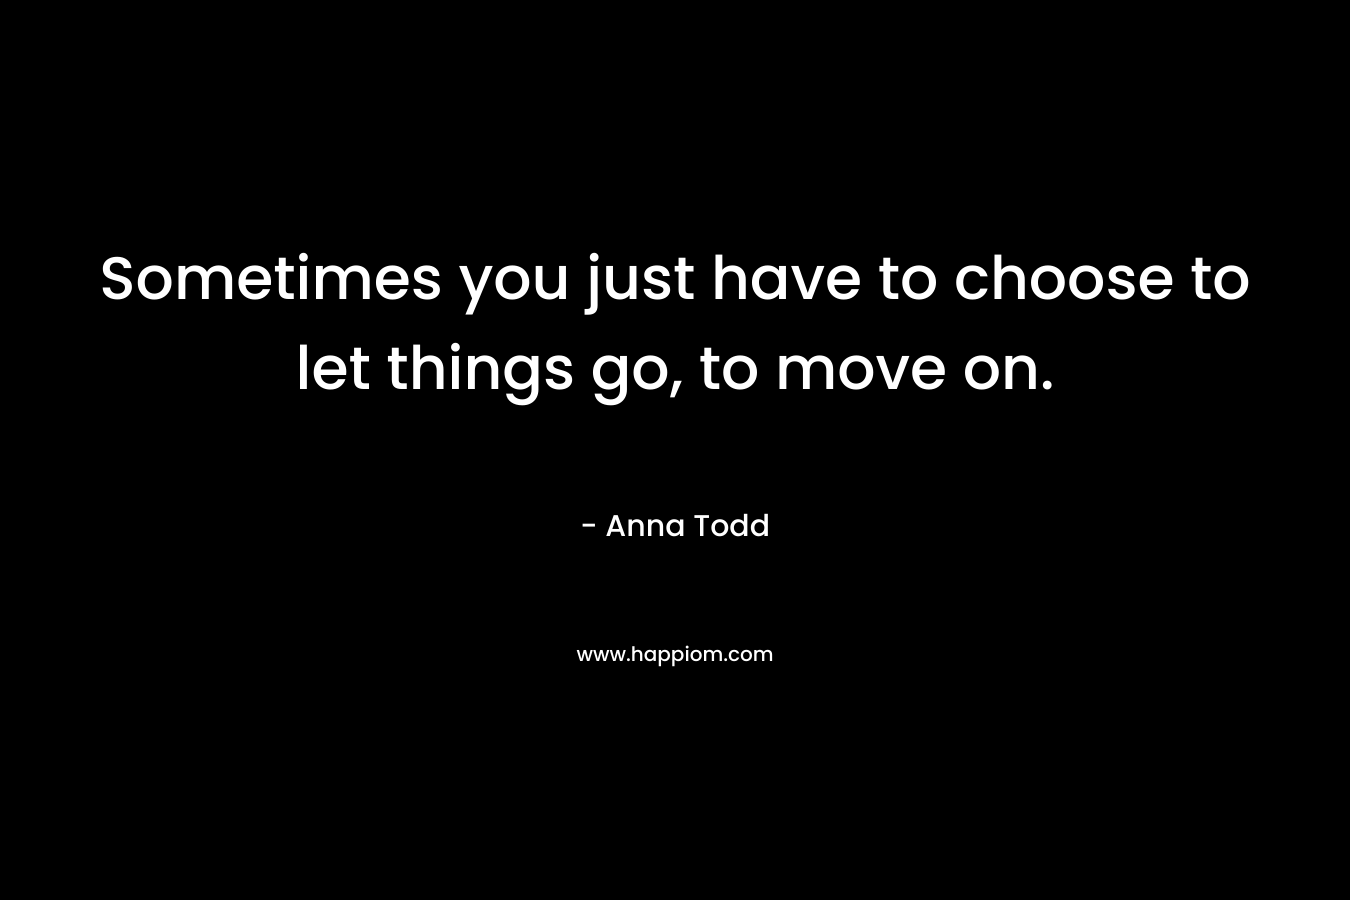 Sometimes you just have to choose to let things go, to move on. – Anna Todd